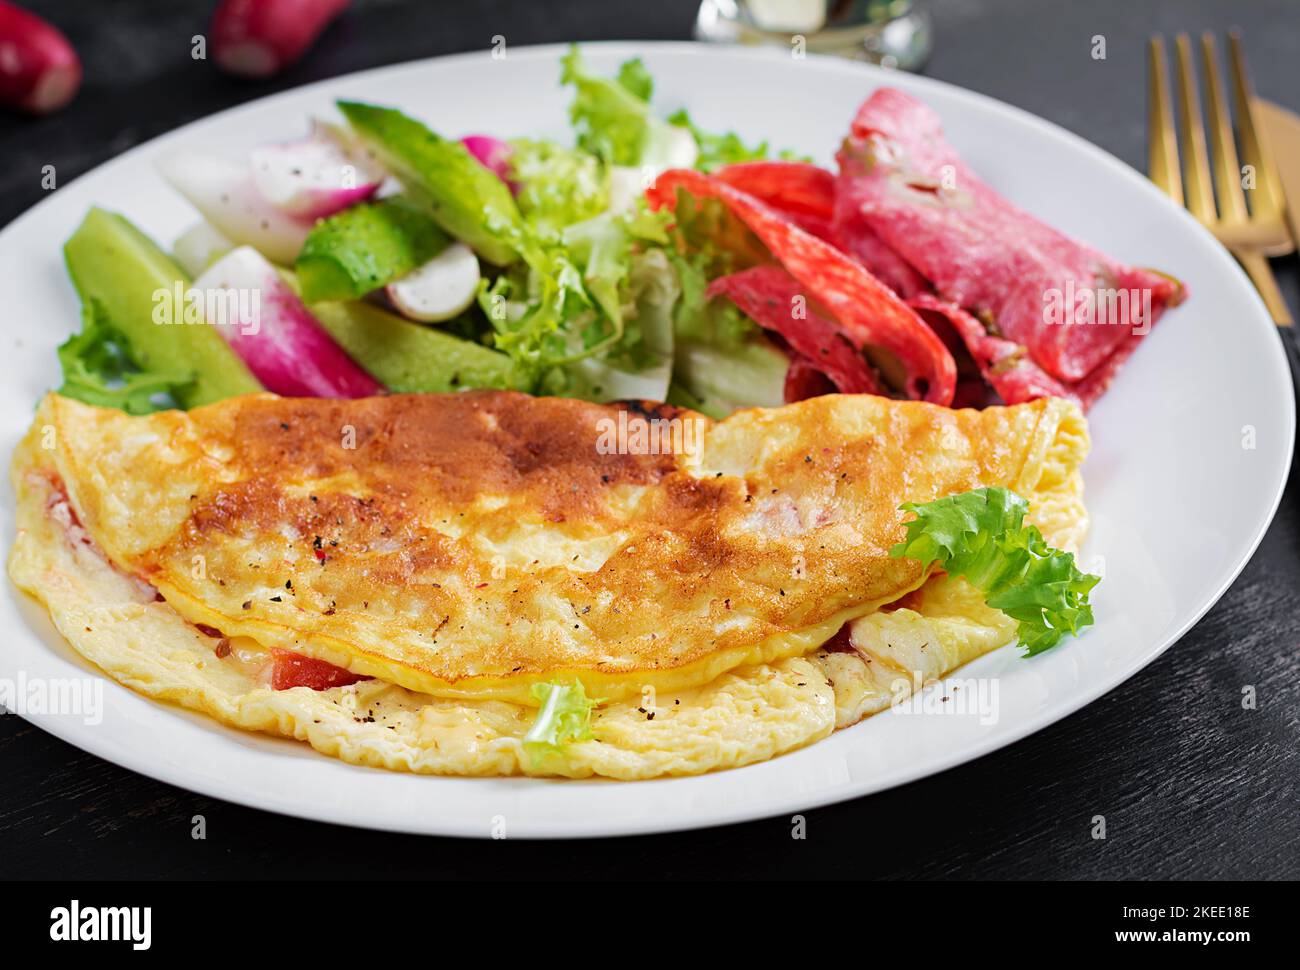 Breakfast. Omelette with cheese and  fresh salad, salami. Frittata - italian omelet. Ketogenic lunch. Stock Photo